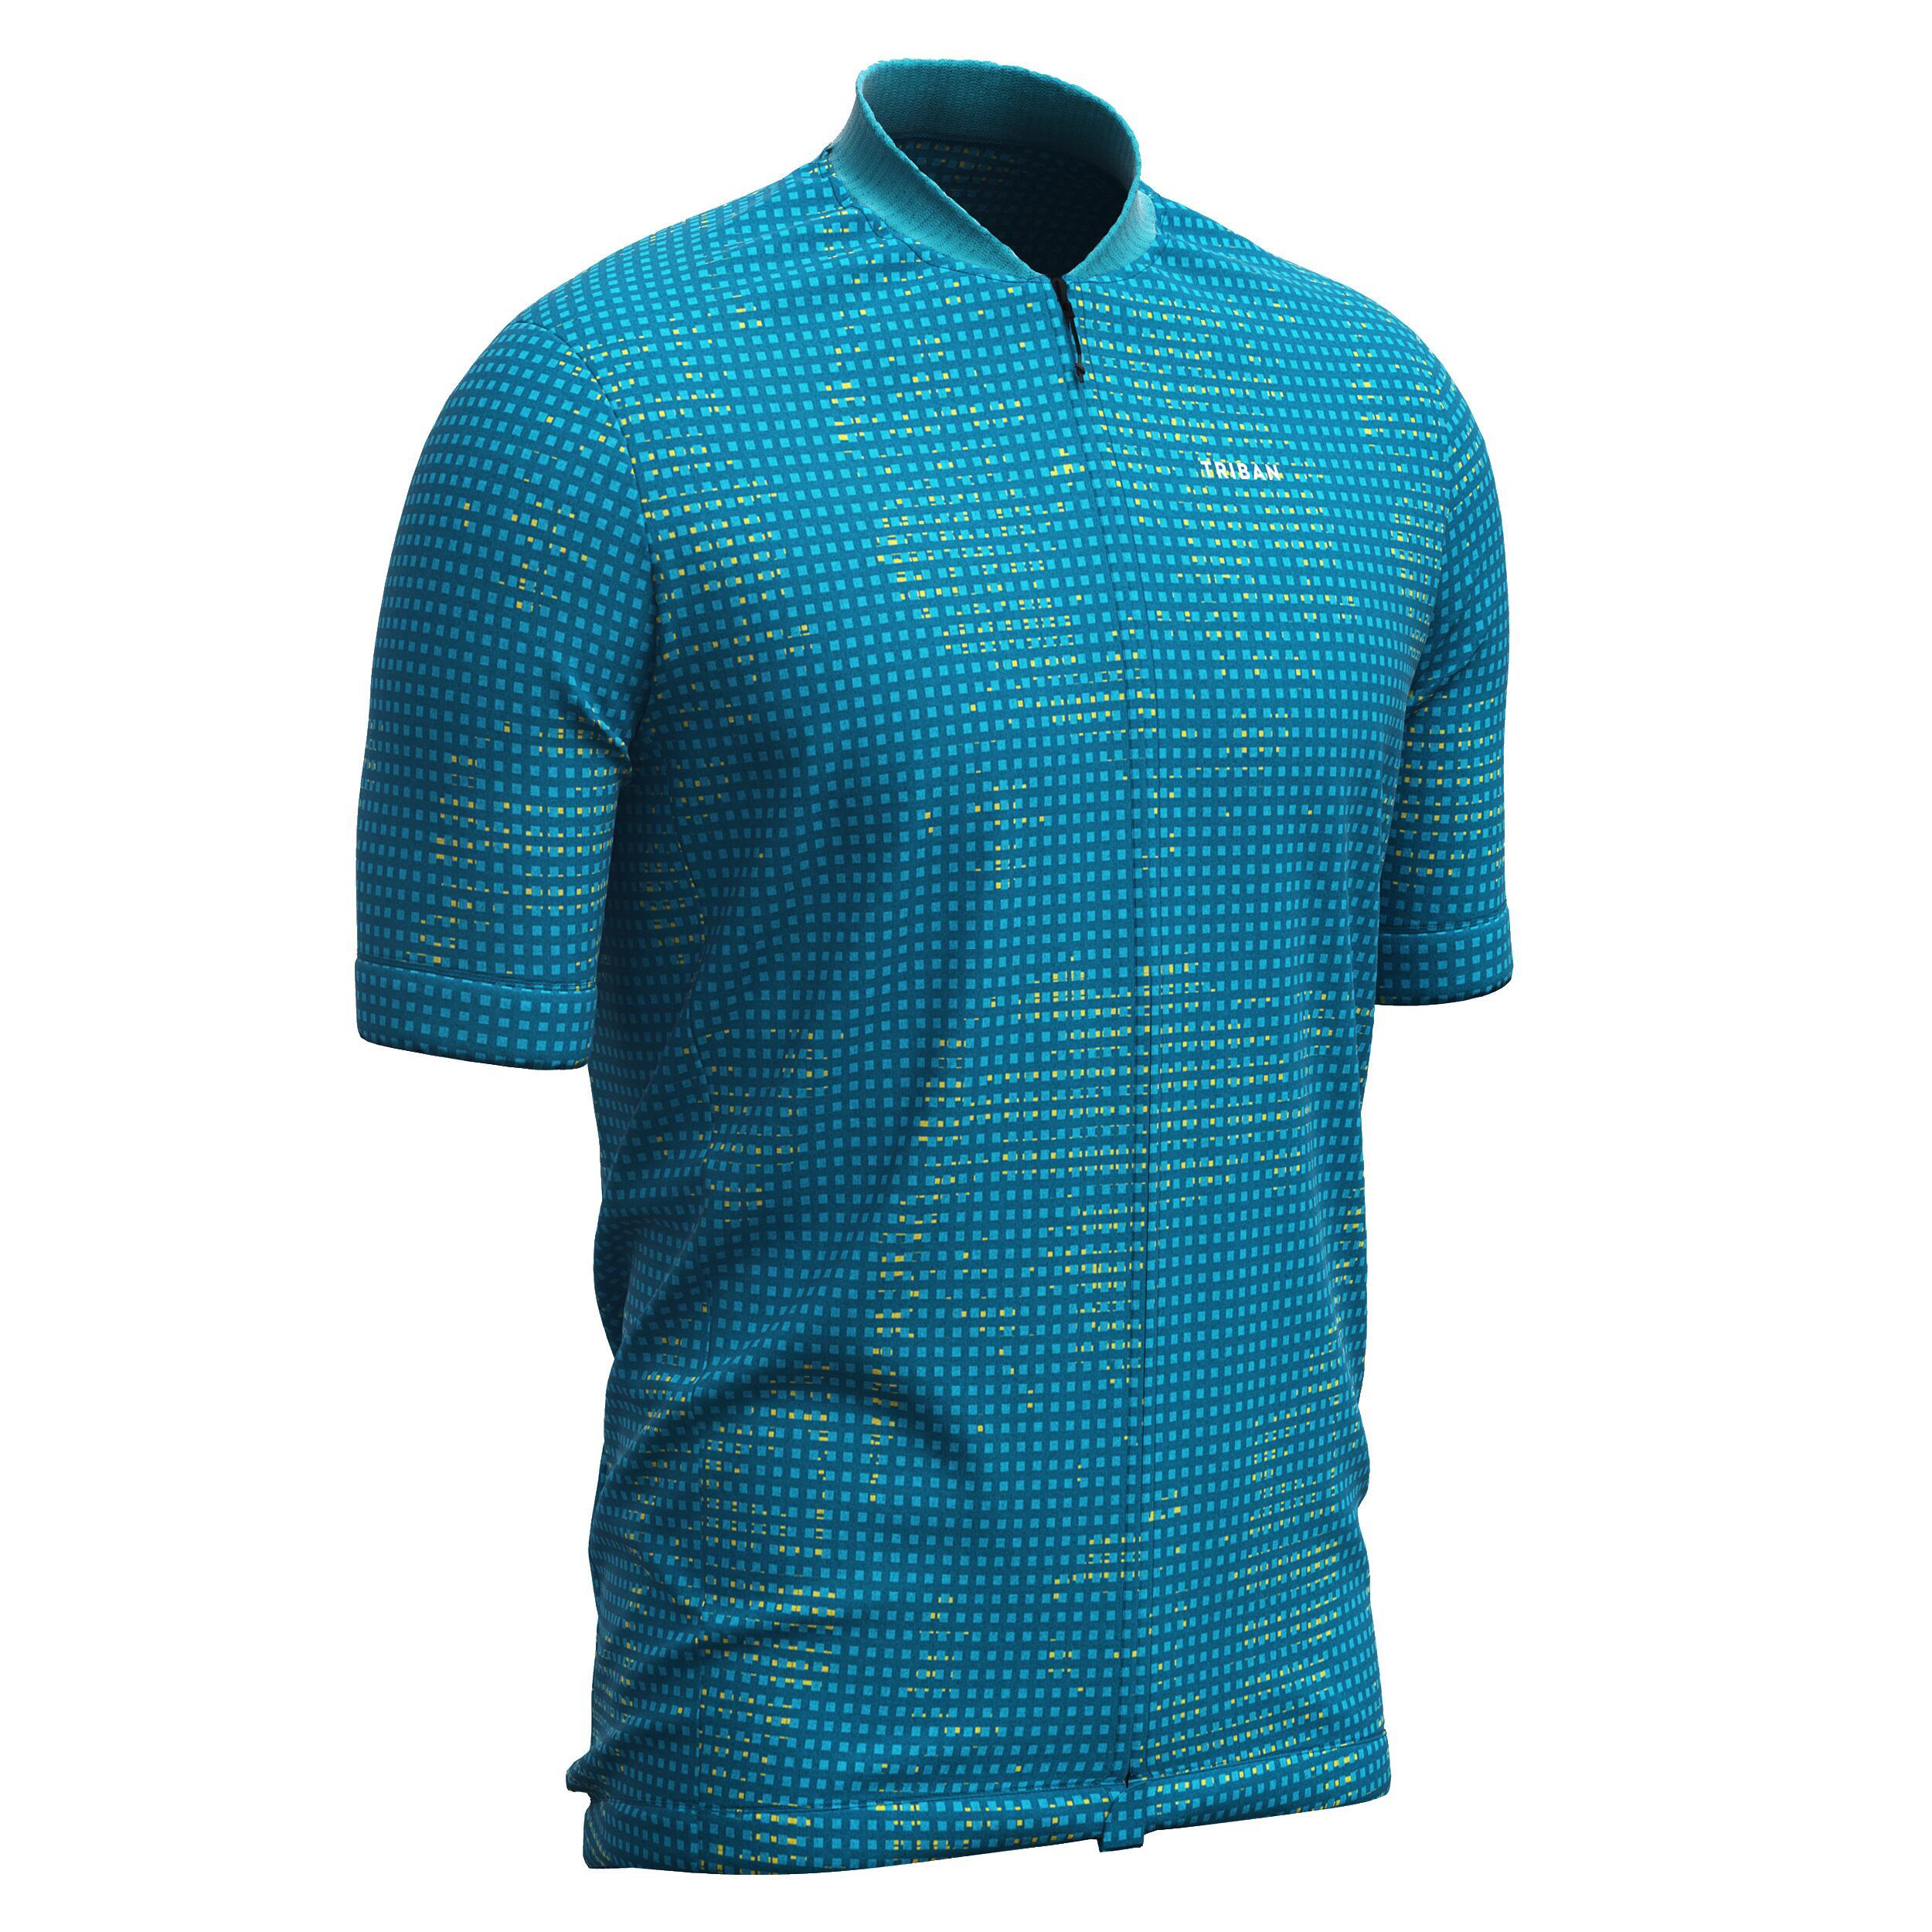 Men's Short-Sleeved Road Cycling Summer Jersey RC100 - Turquoise 1/7